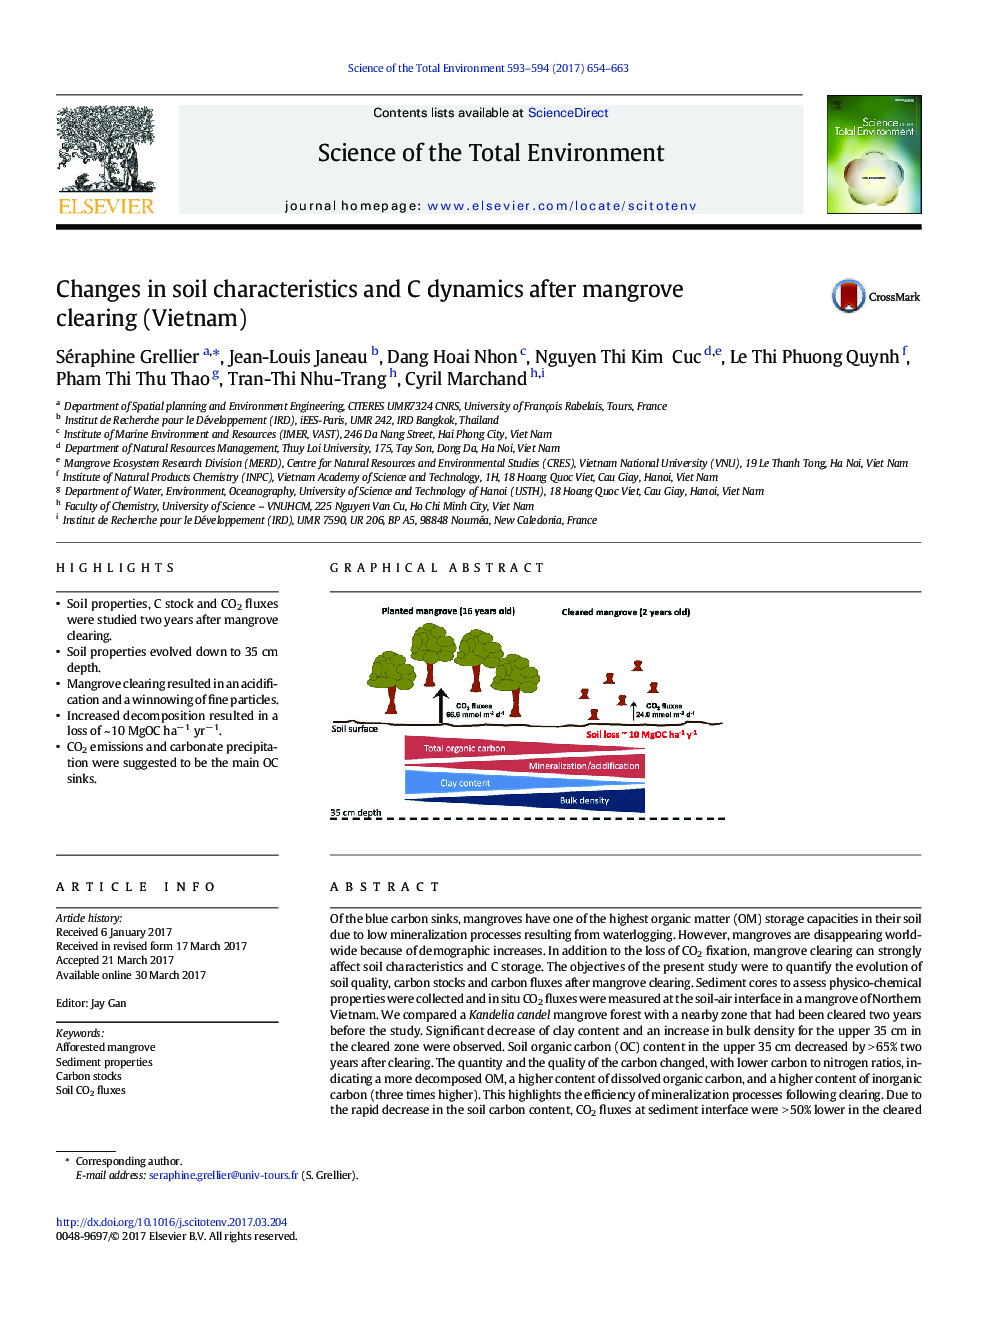 Changes in soil characteristics and C dynamics after mangrove clearing (Vietnam)